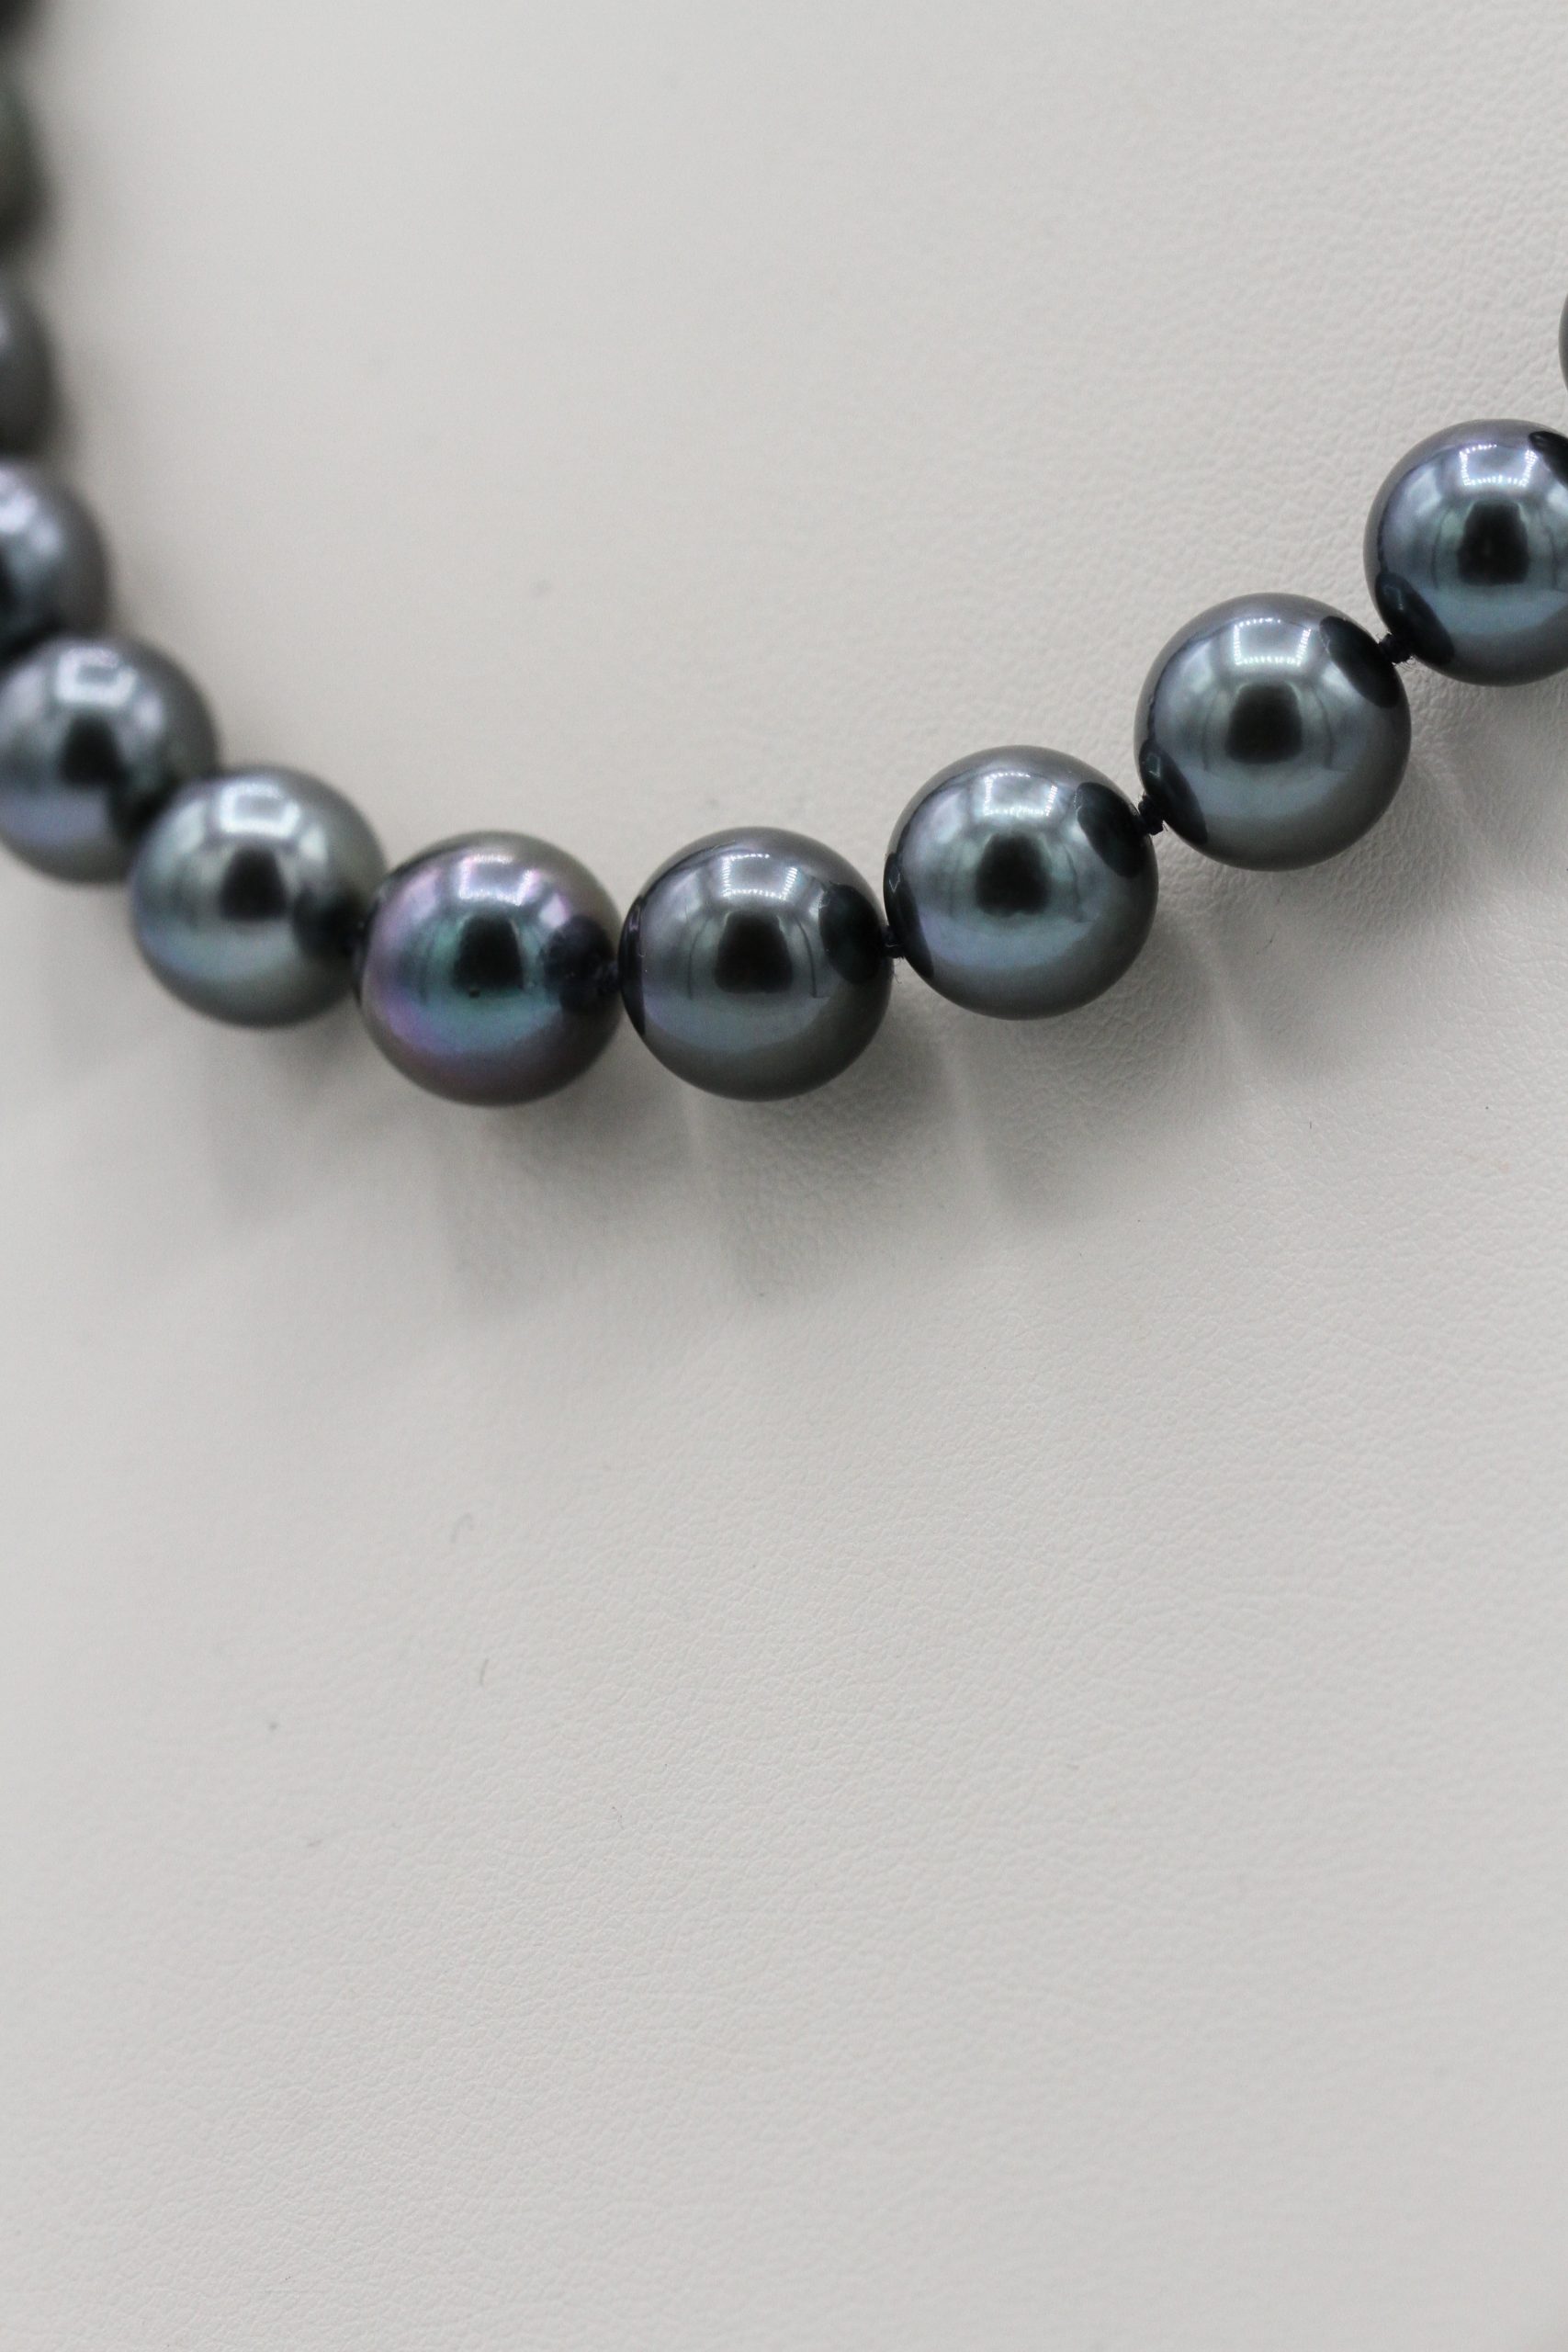 Pearl Necklaces in West Chester, PA | Sunset Hill Jewelers